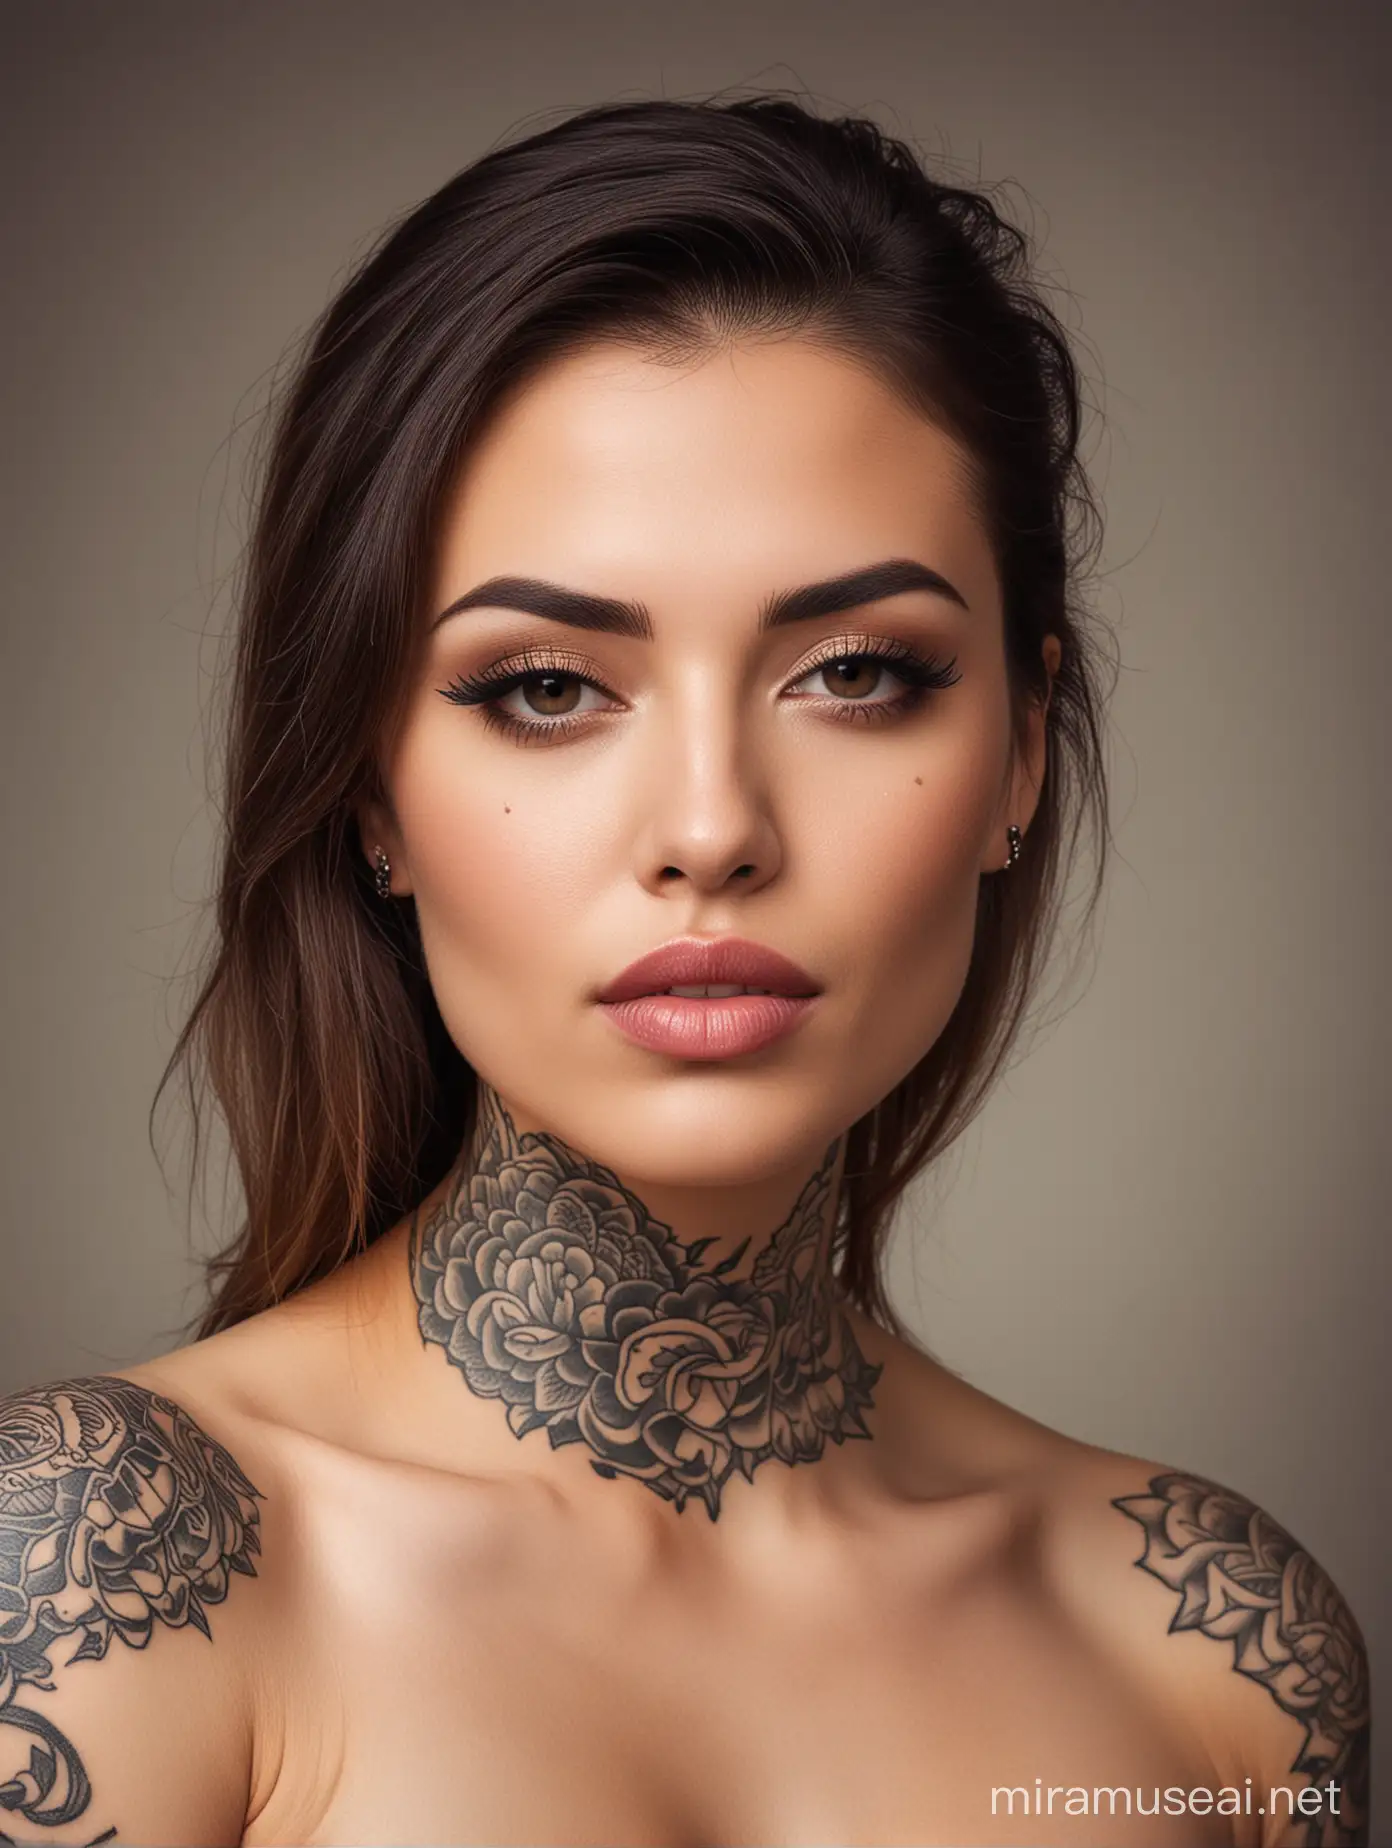 Seductive Woman with Traditional Chin Tattoo